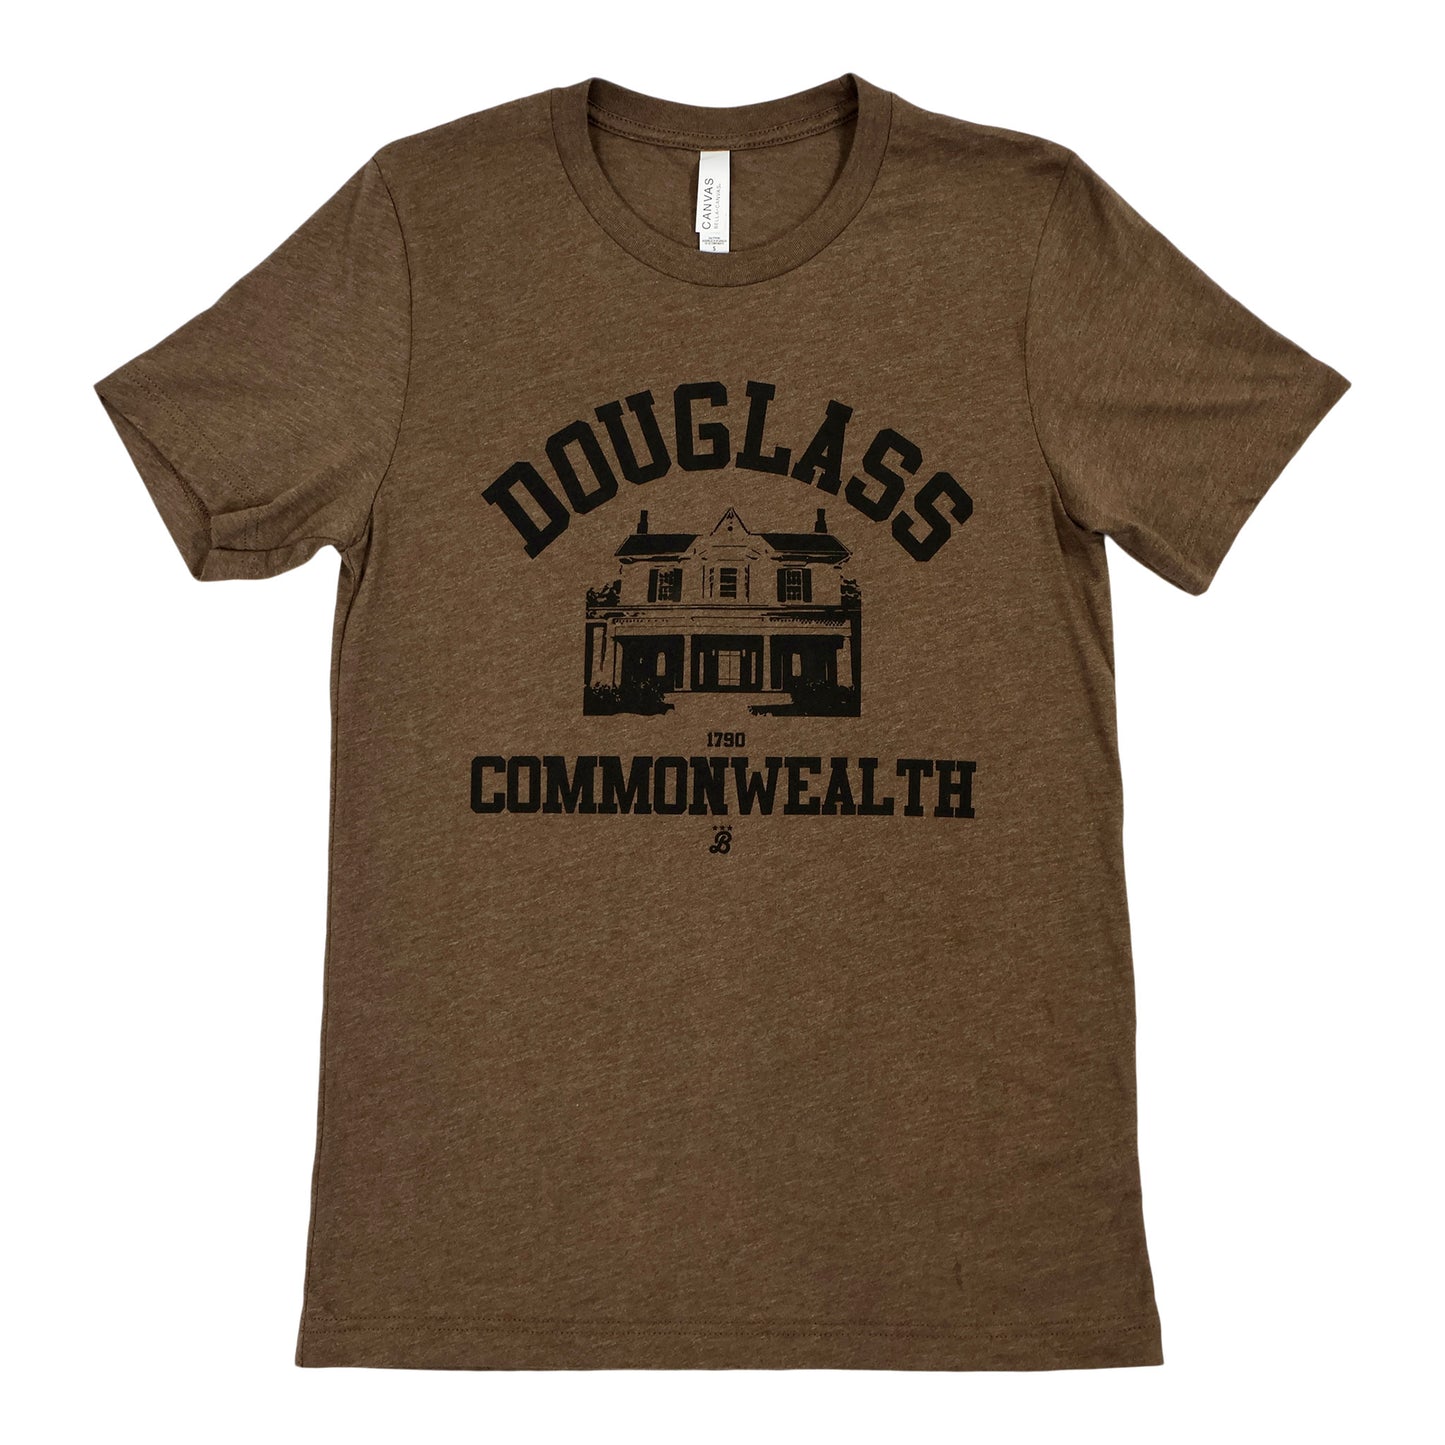 Heather Brown T-shirt with the words "Douglass Commonwealth" on the front